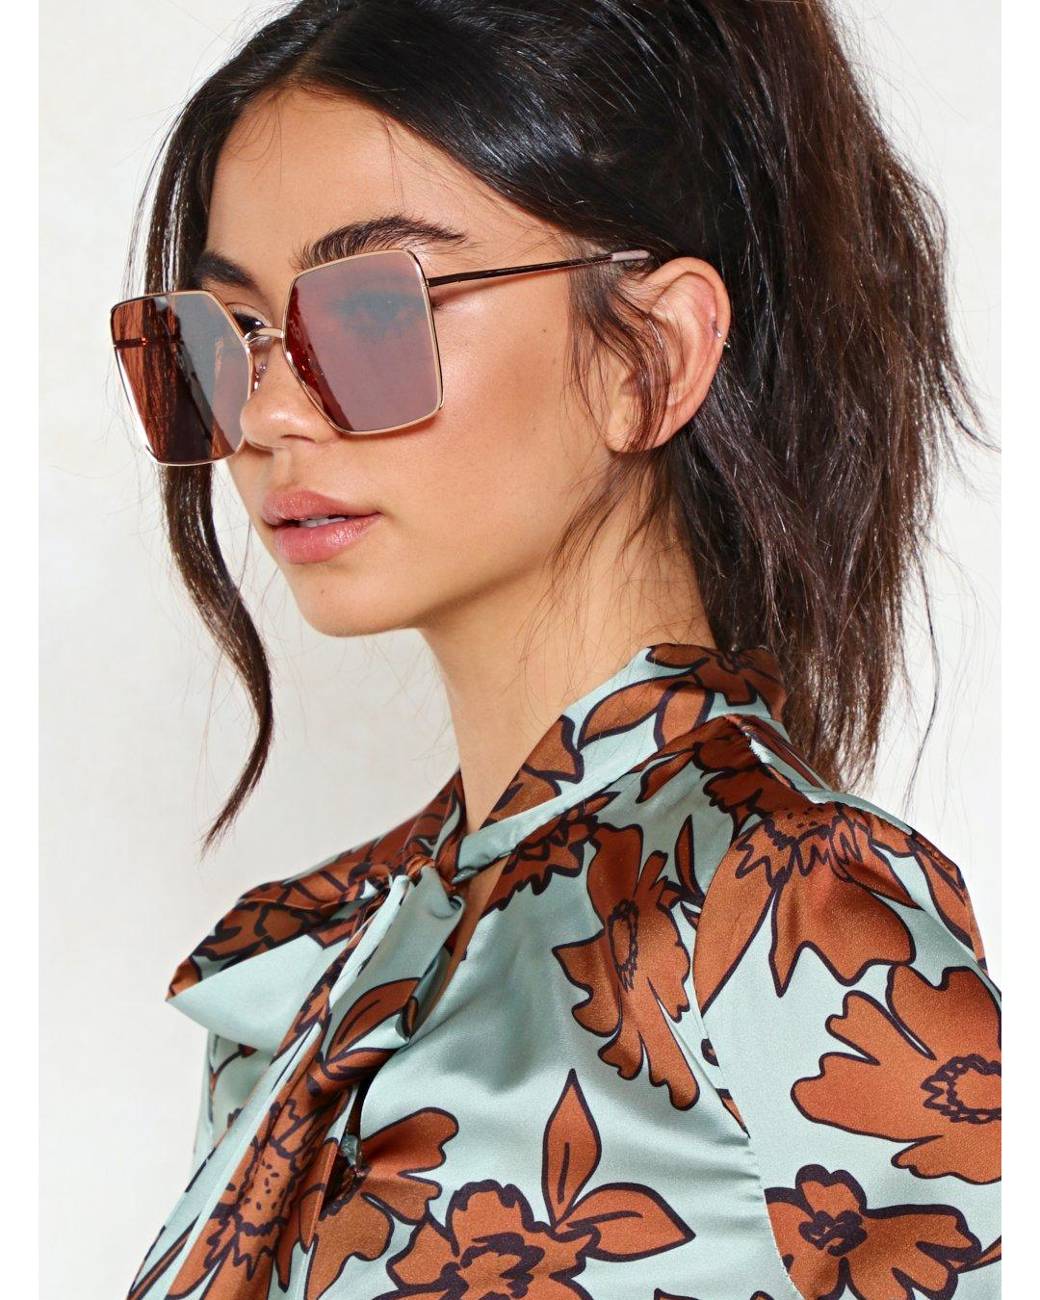 15 Stylish Sunglasses All Under $20 to Wear This Summer